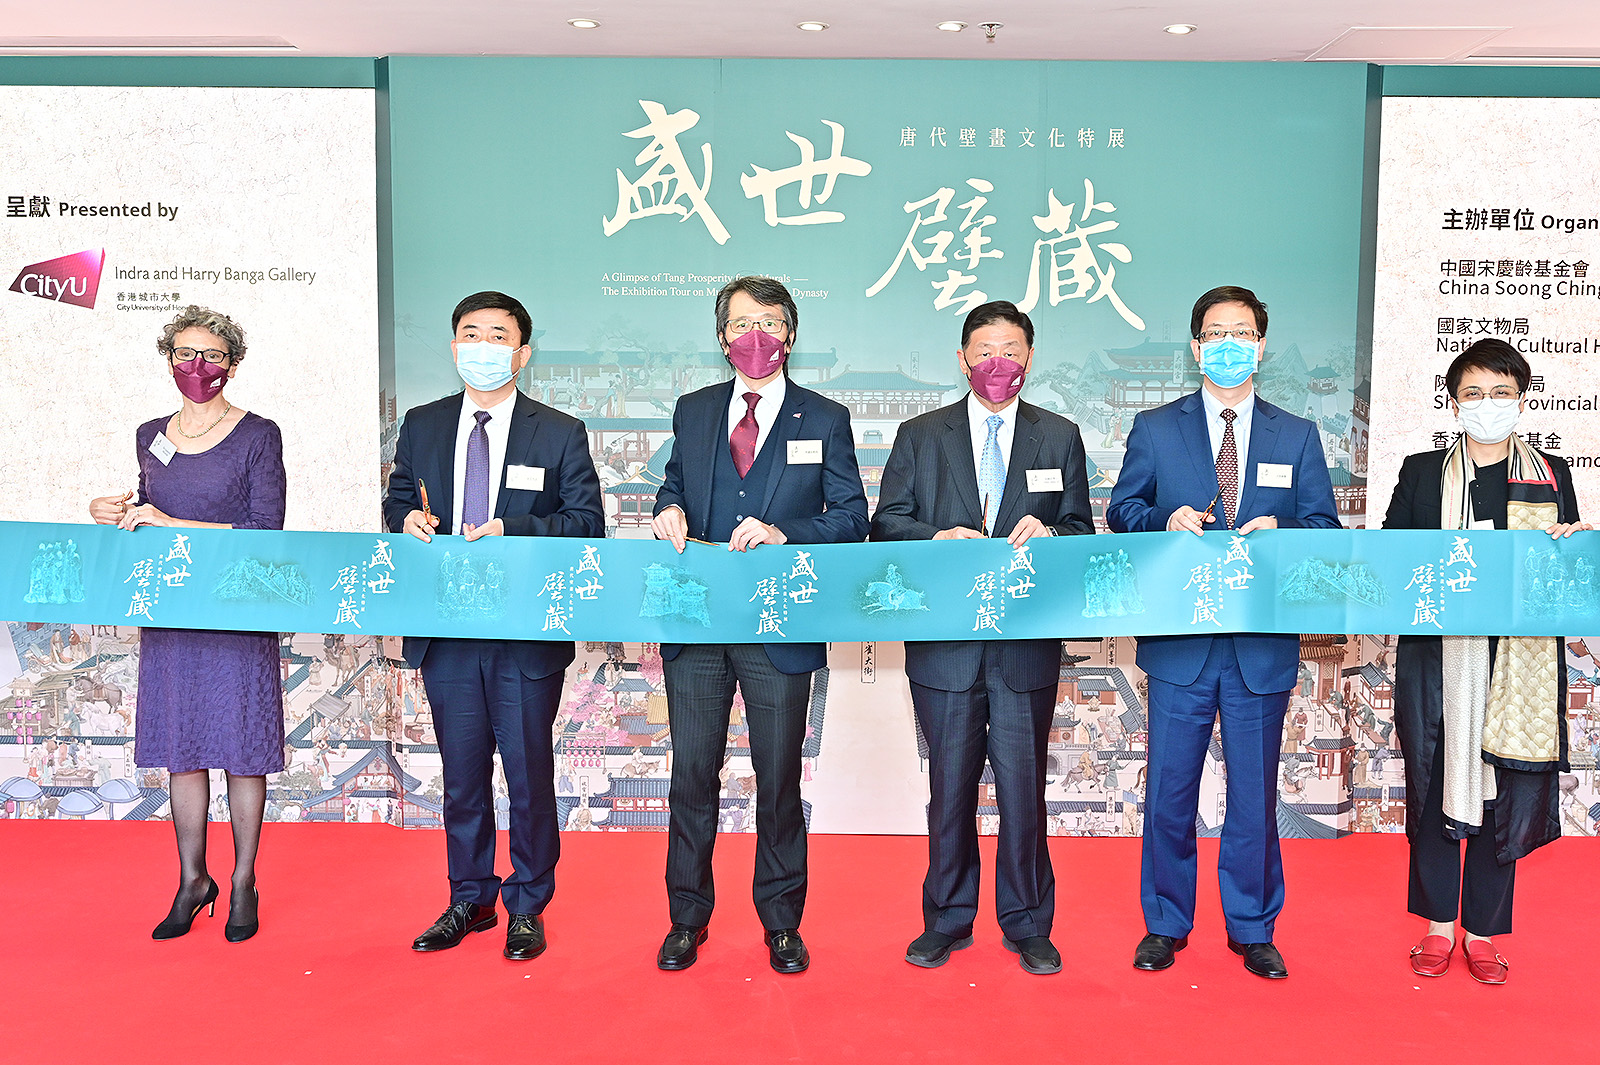 Officiating at the opening ceremony were (from left): Dr Isabelle Frank, Director of the Indra and Harry Banga Gallery; Mr Zhu Wen, Director-General, Coordination Department, Liaison Office of the Central People’s Government, Hong Kong SAR; Professor Matthew Lee Kwok-on, Acting President of CityU; Dr Herman Hu Shao-ming, SBS, JP, Founding President of Hong Kong Rosamond Foundation; Counselor Wang Qi, Director, Department of International Organizations and Conferences, Office of the Commissioner of the Ministry of Foreign Affairs of the People’s Republic of China, Hong Kong SAR; Ms Eve Tam Mei-yee, Assistant Director (Heritage & Museums), Leisure and Cultural Services Department.